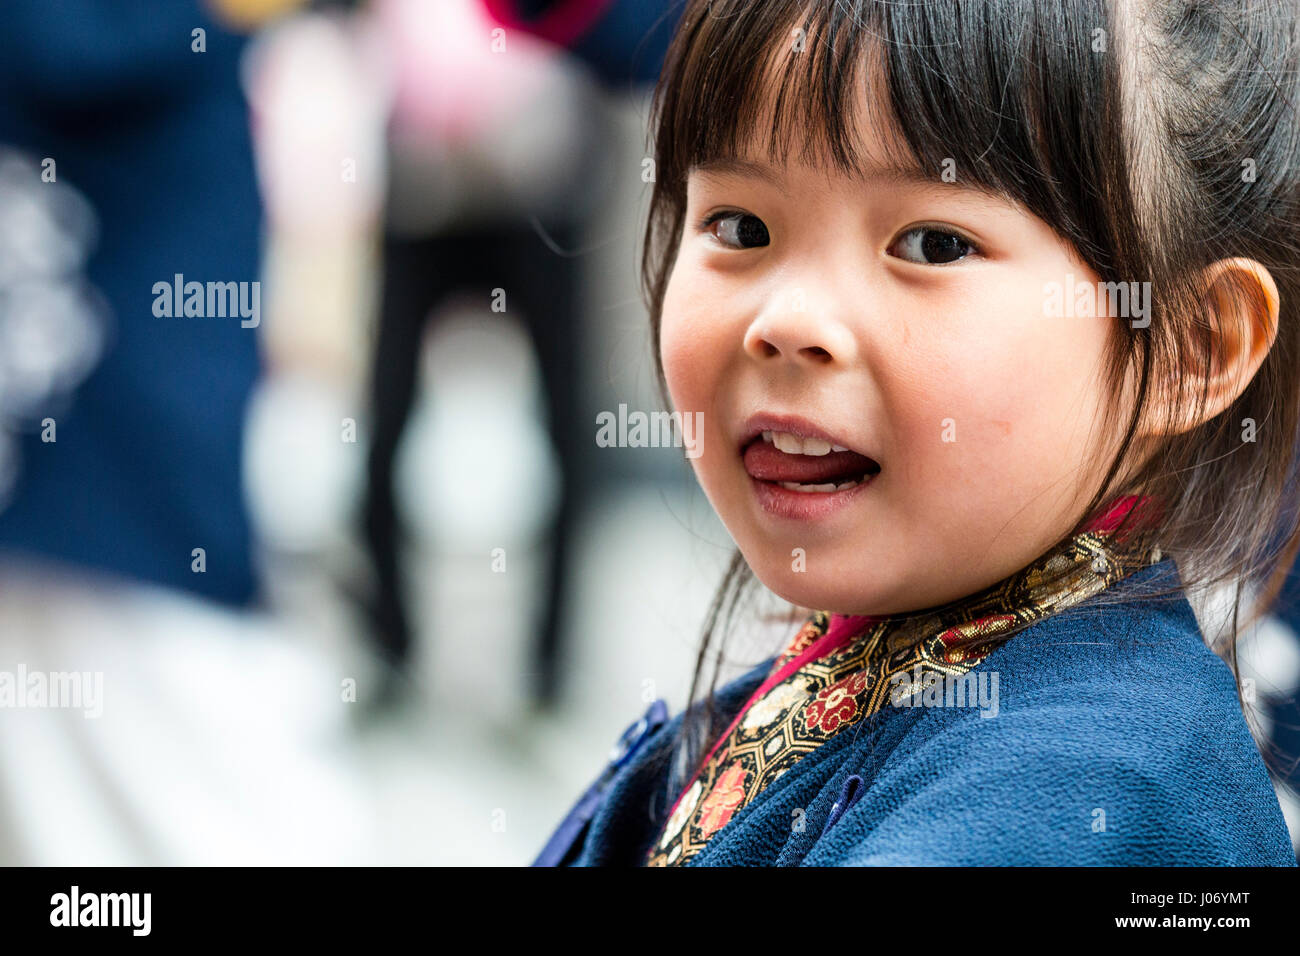 Hinokuni Yosakoi dance festival. Japanese child, girl, 4-5 years old, head and shoulder, face turned to look at viewer, eye-contact, tongue poking out. Stock Photo